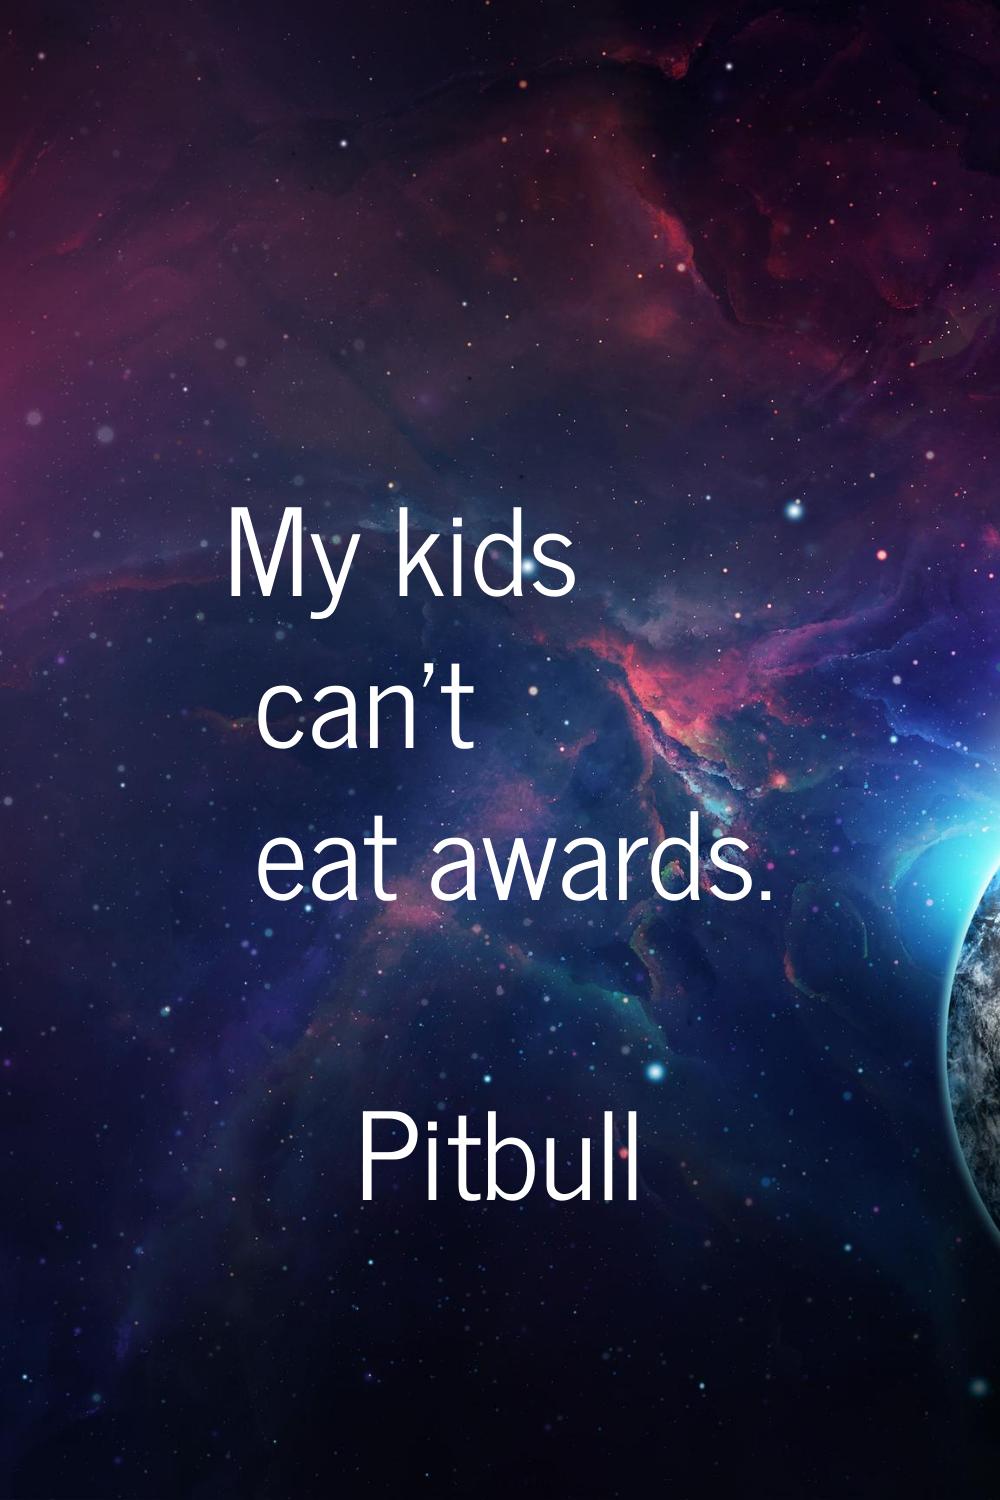 My kids can't eat awards.